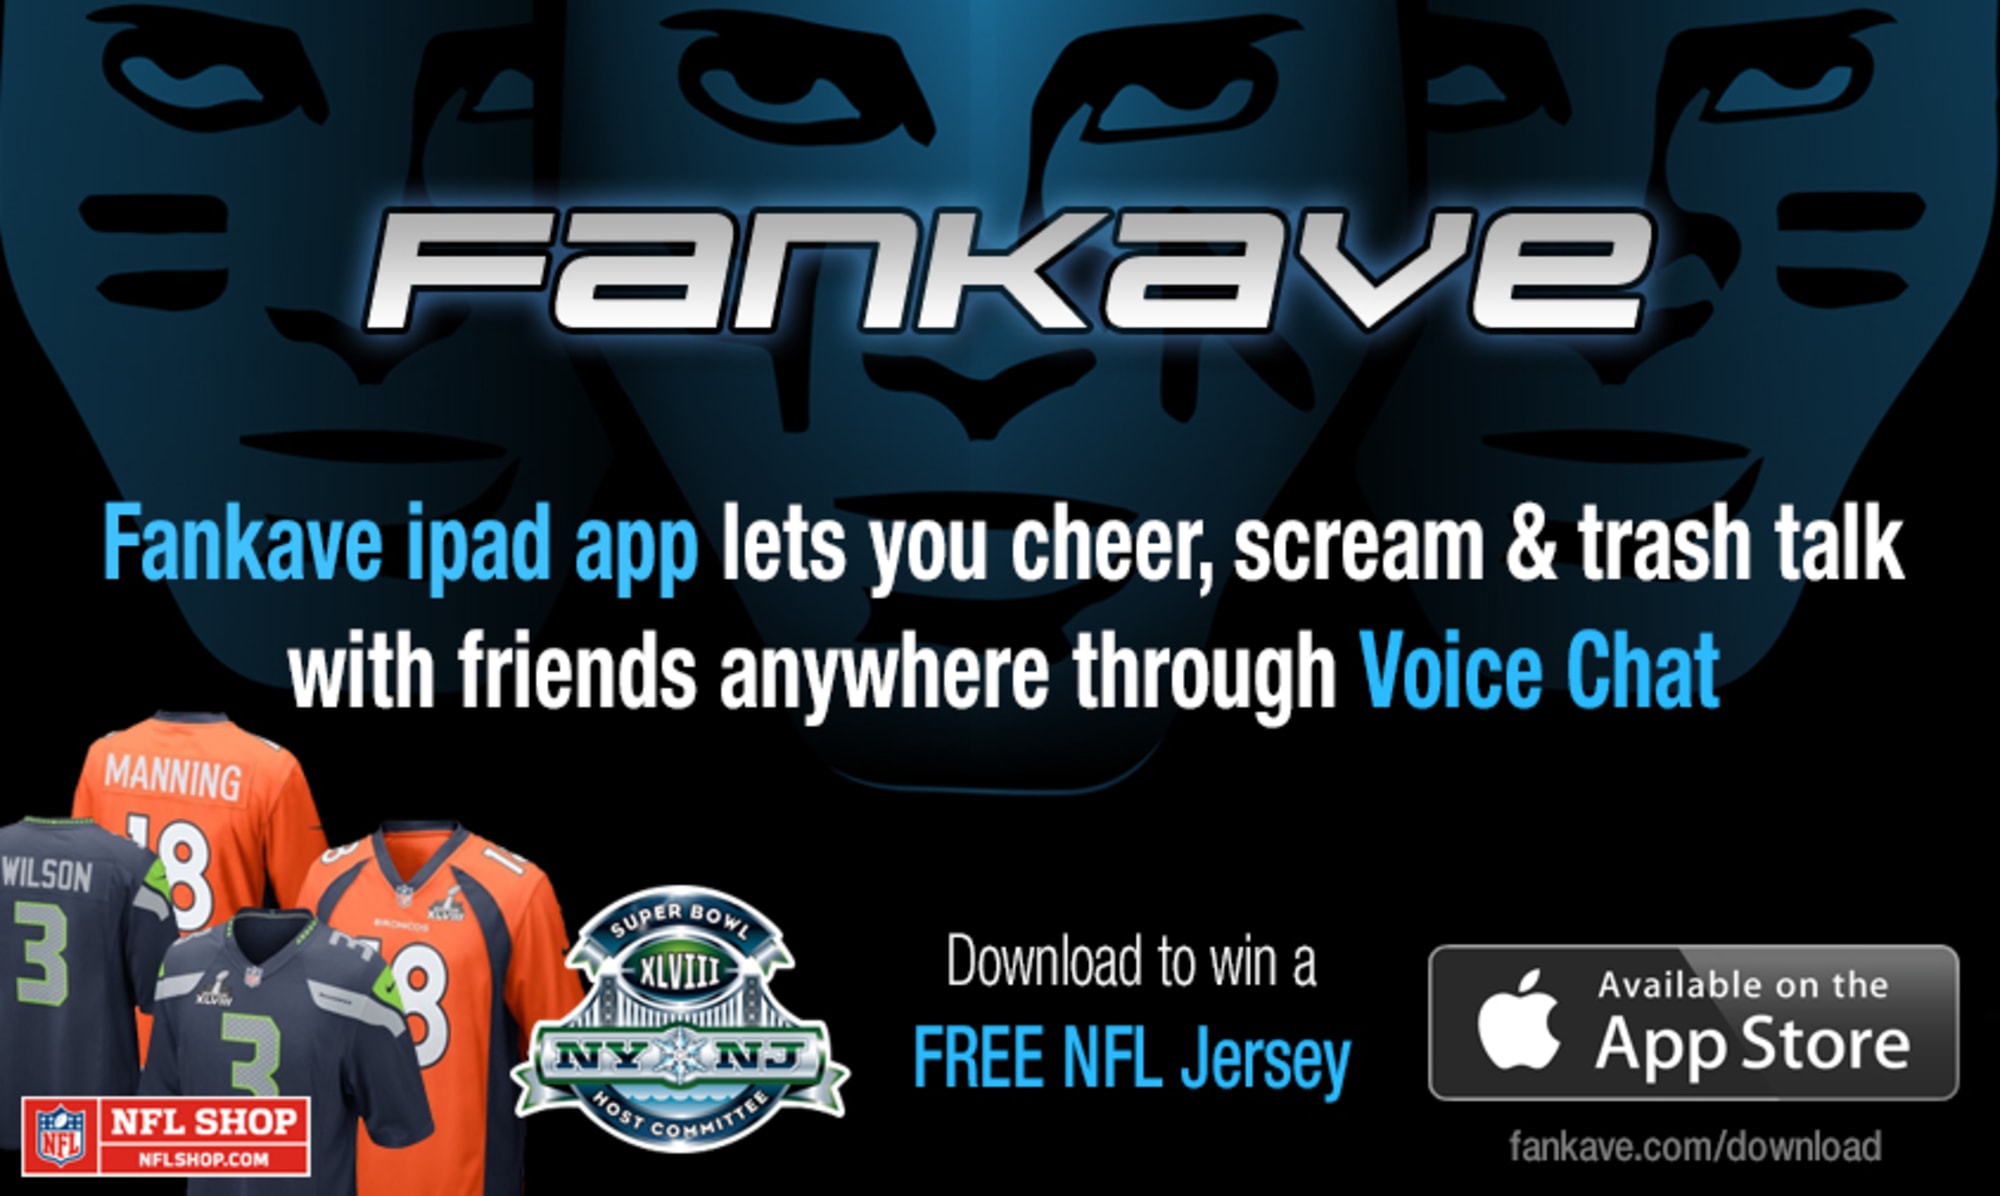 Win a Limited Edition Super Bowl Jersey from FanKave